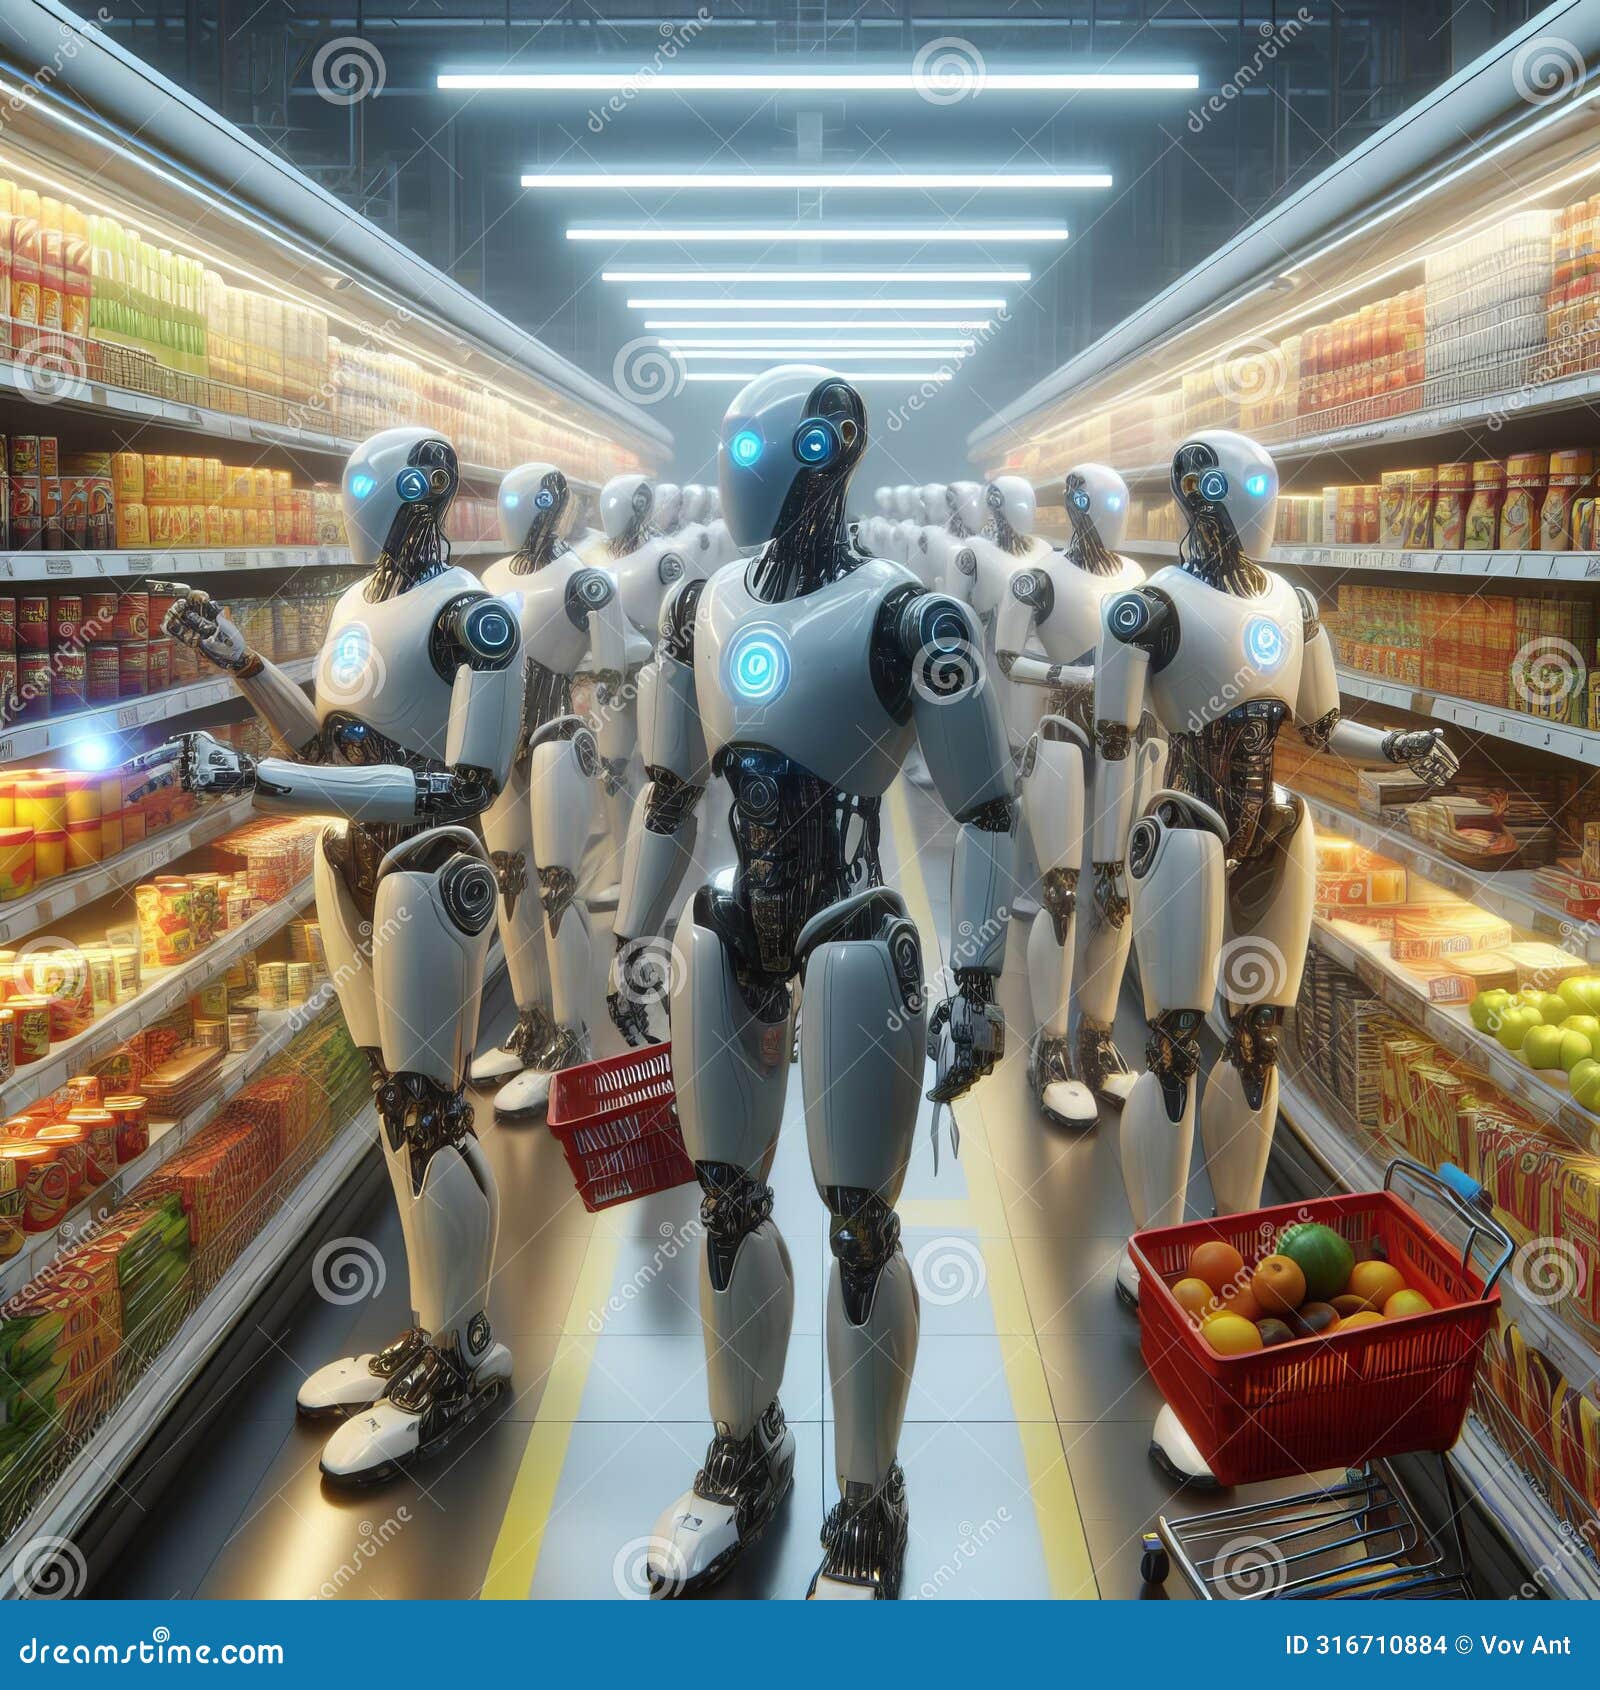 a group of robots scanning the aisles for food items, photorea